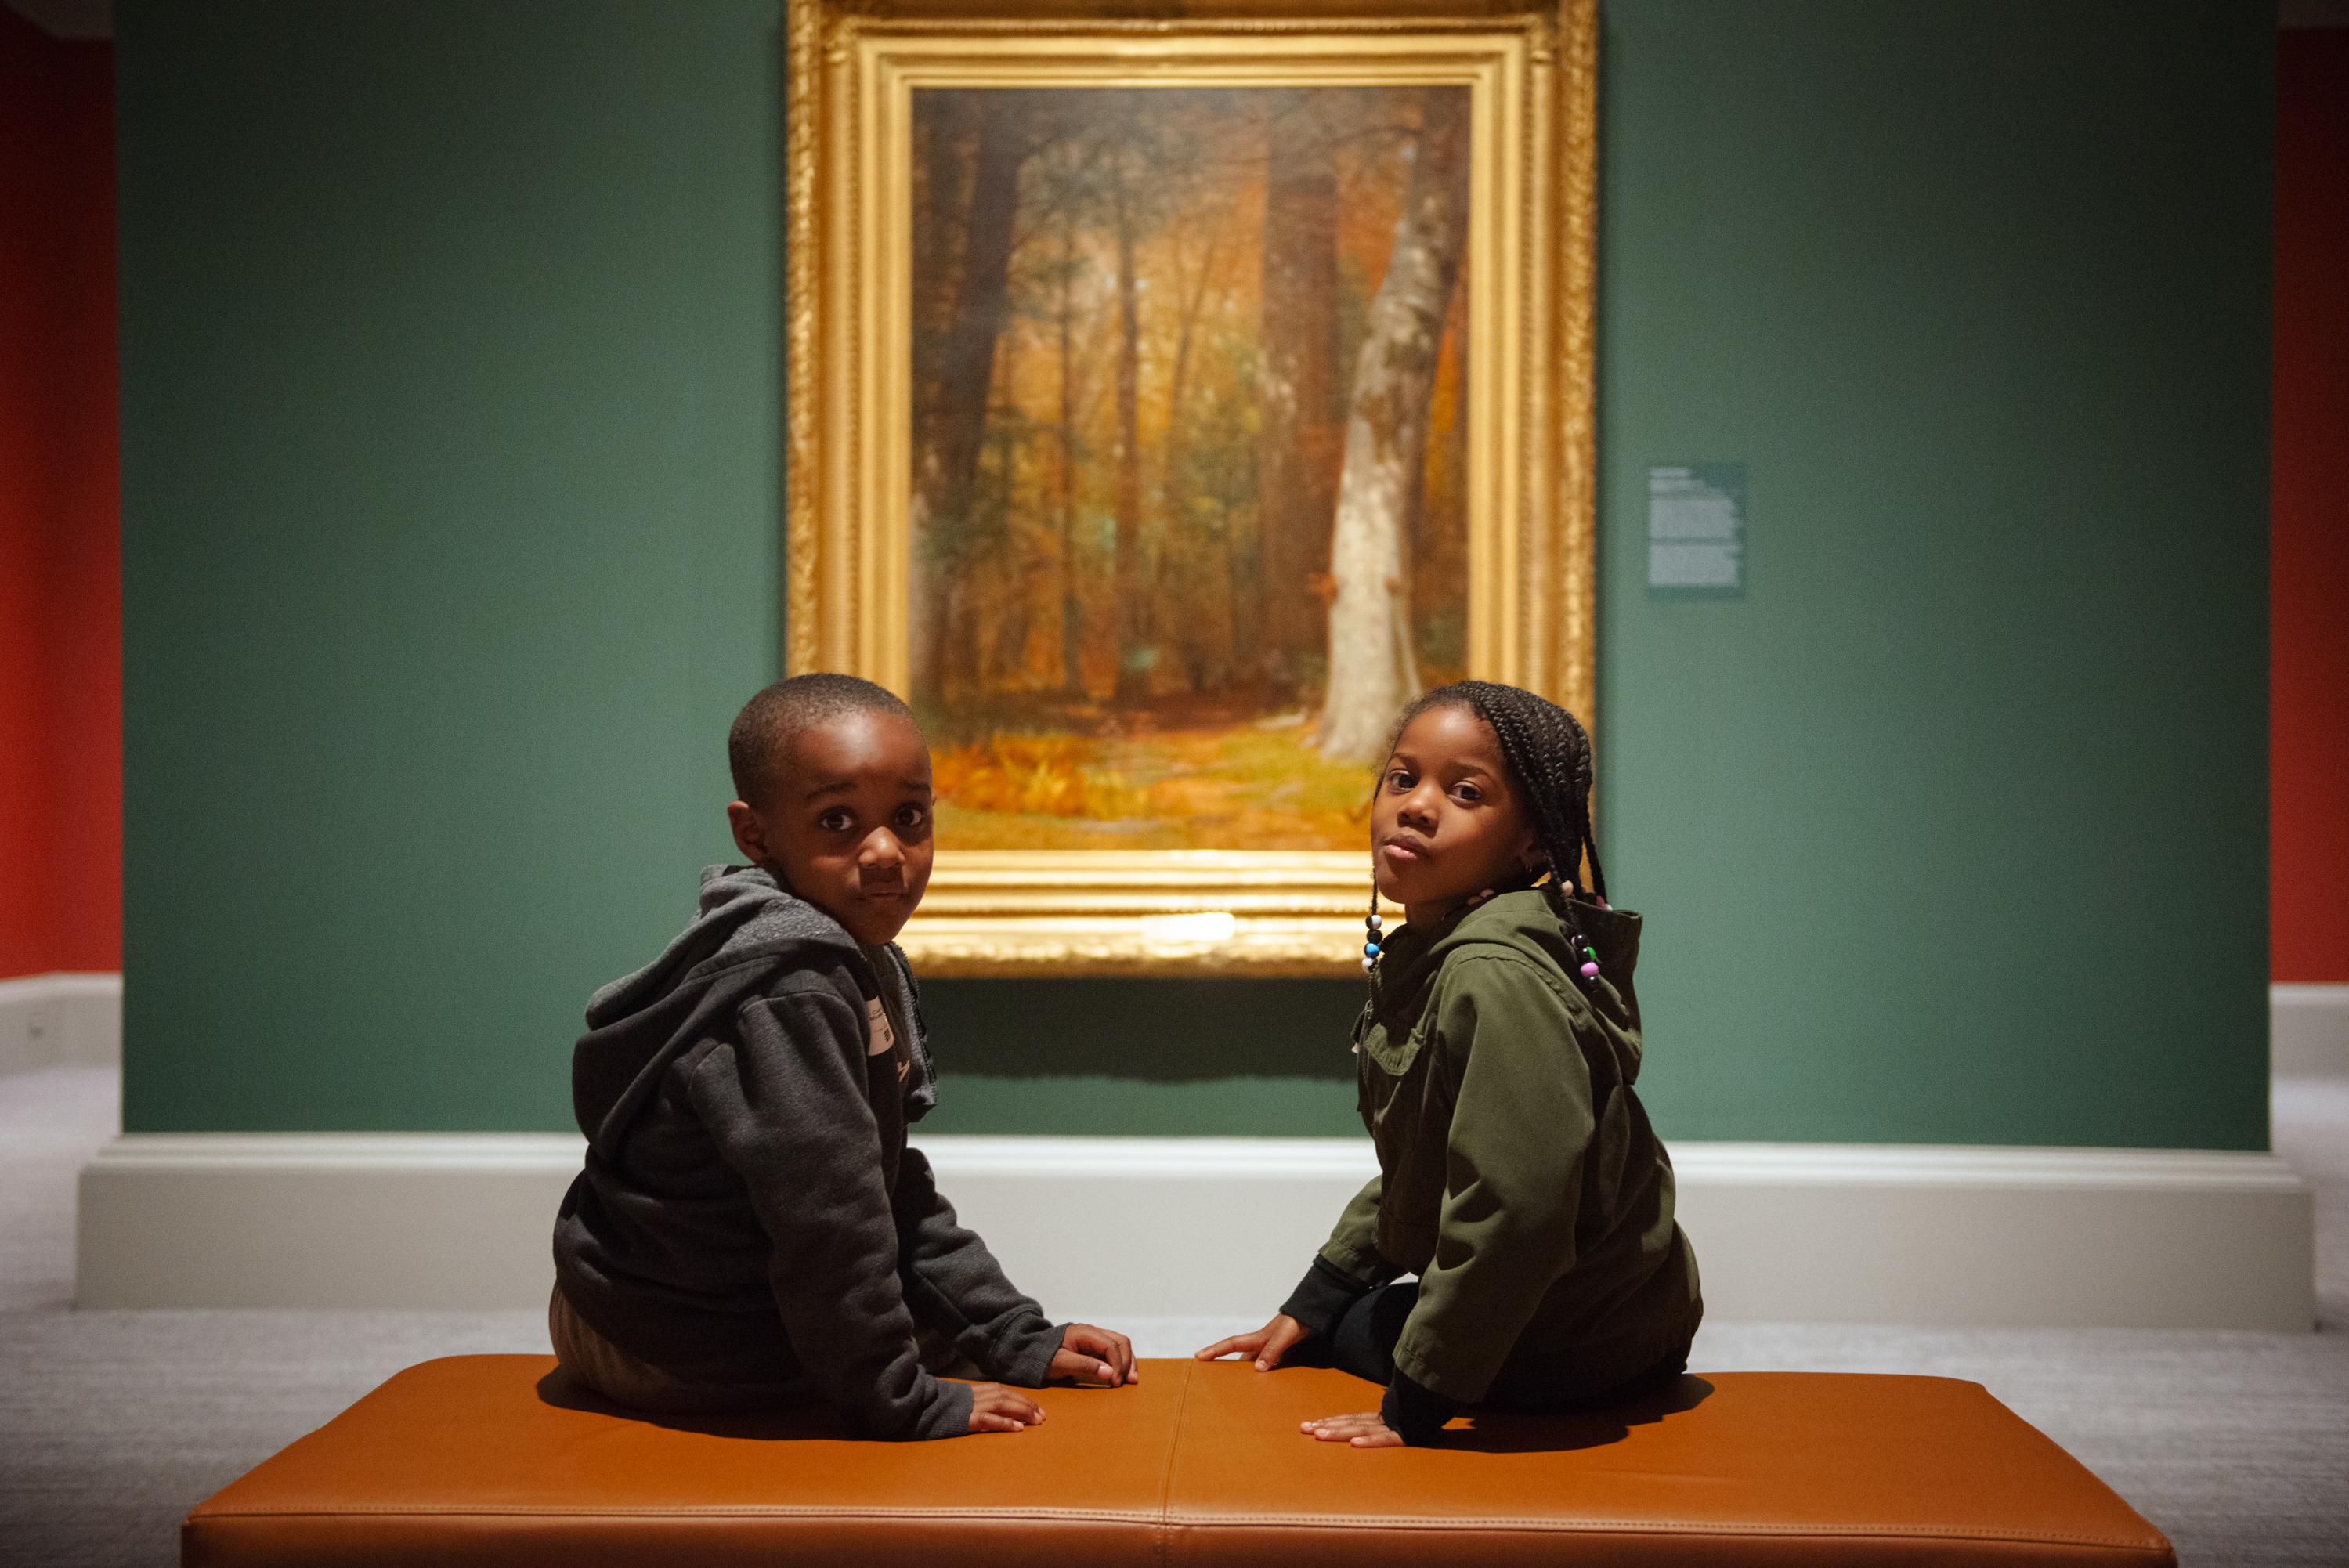 Two children of color in front of nature in fall season painting